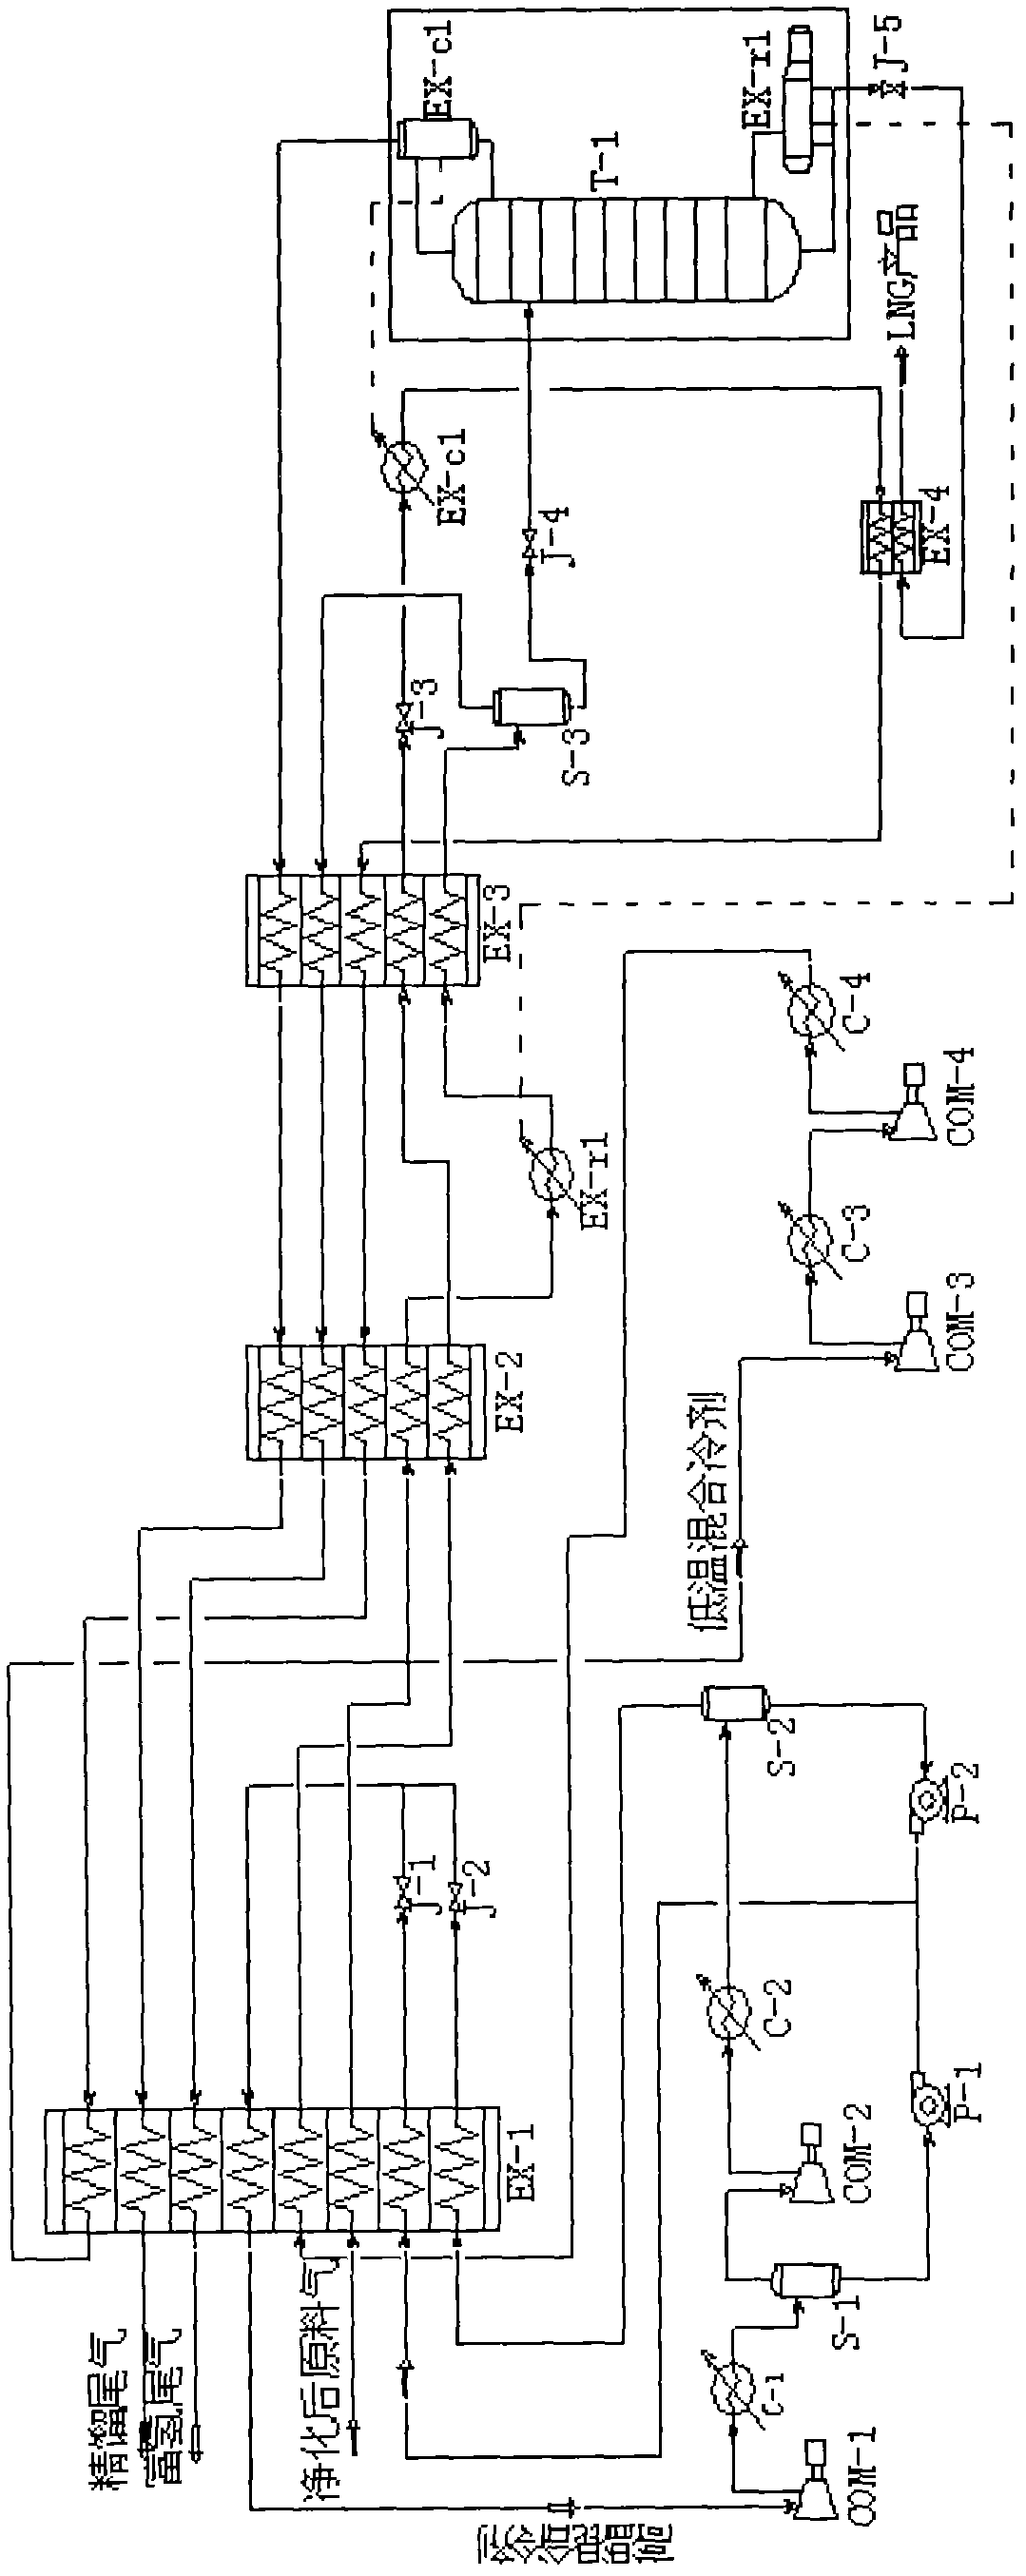 Method for producing liquefied natural gas by using coke oven gas